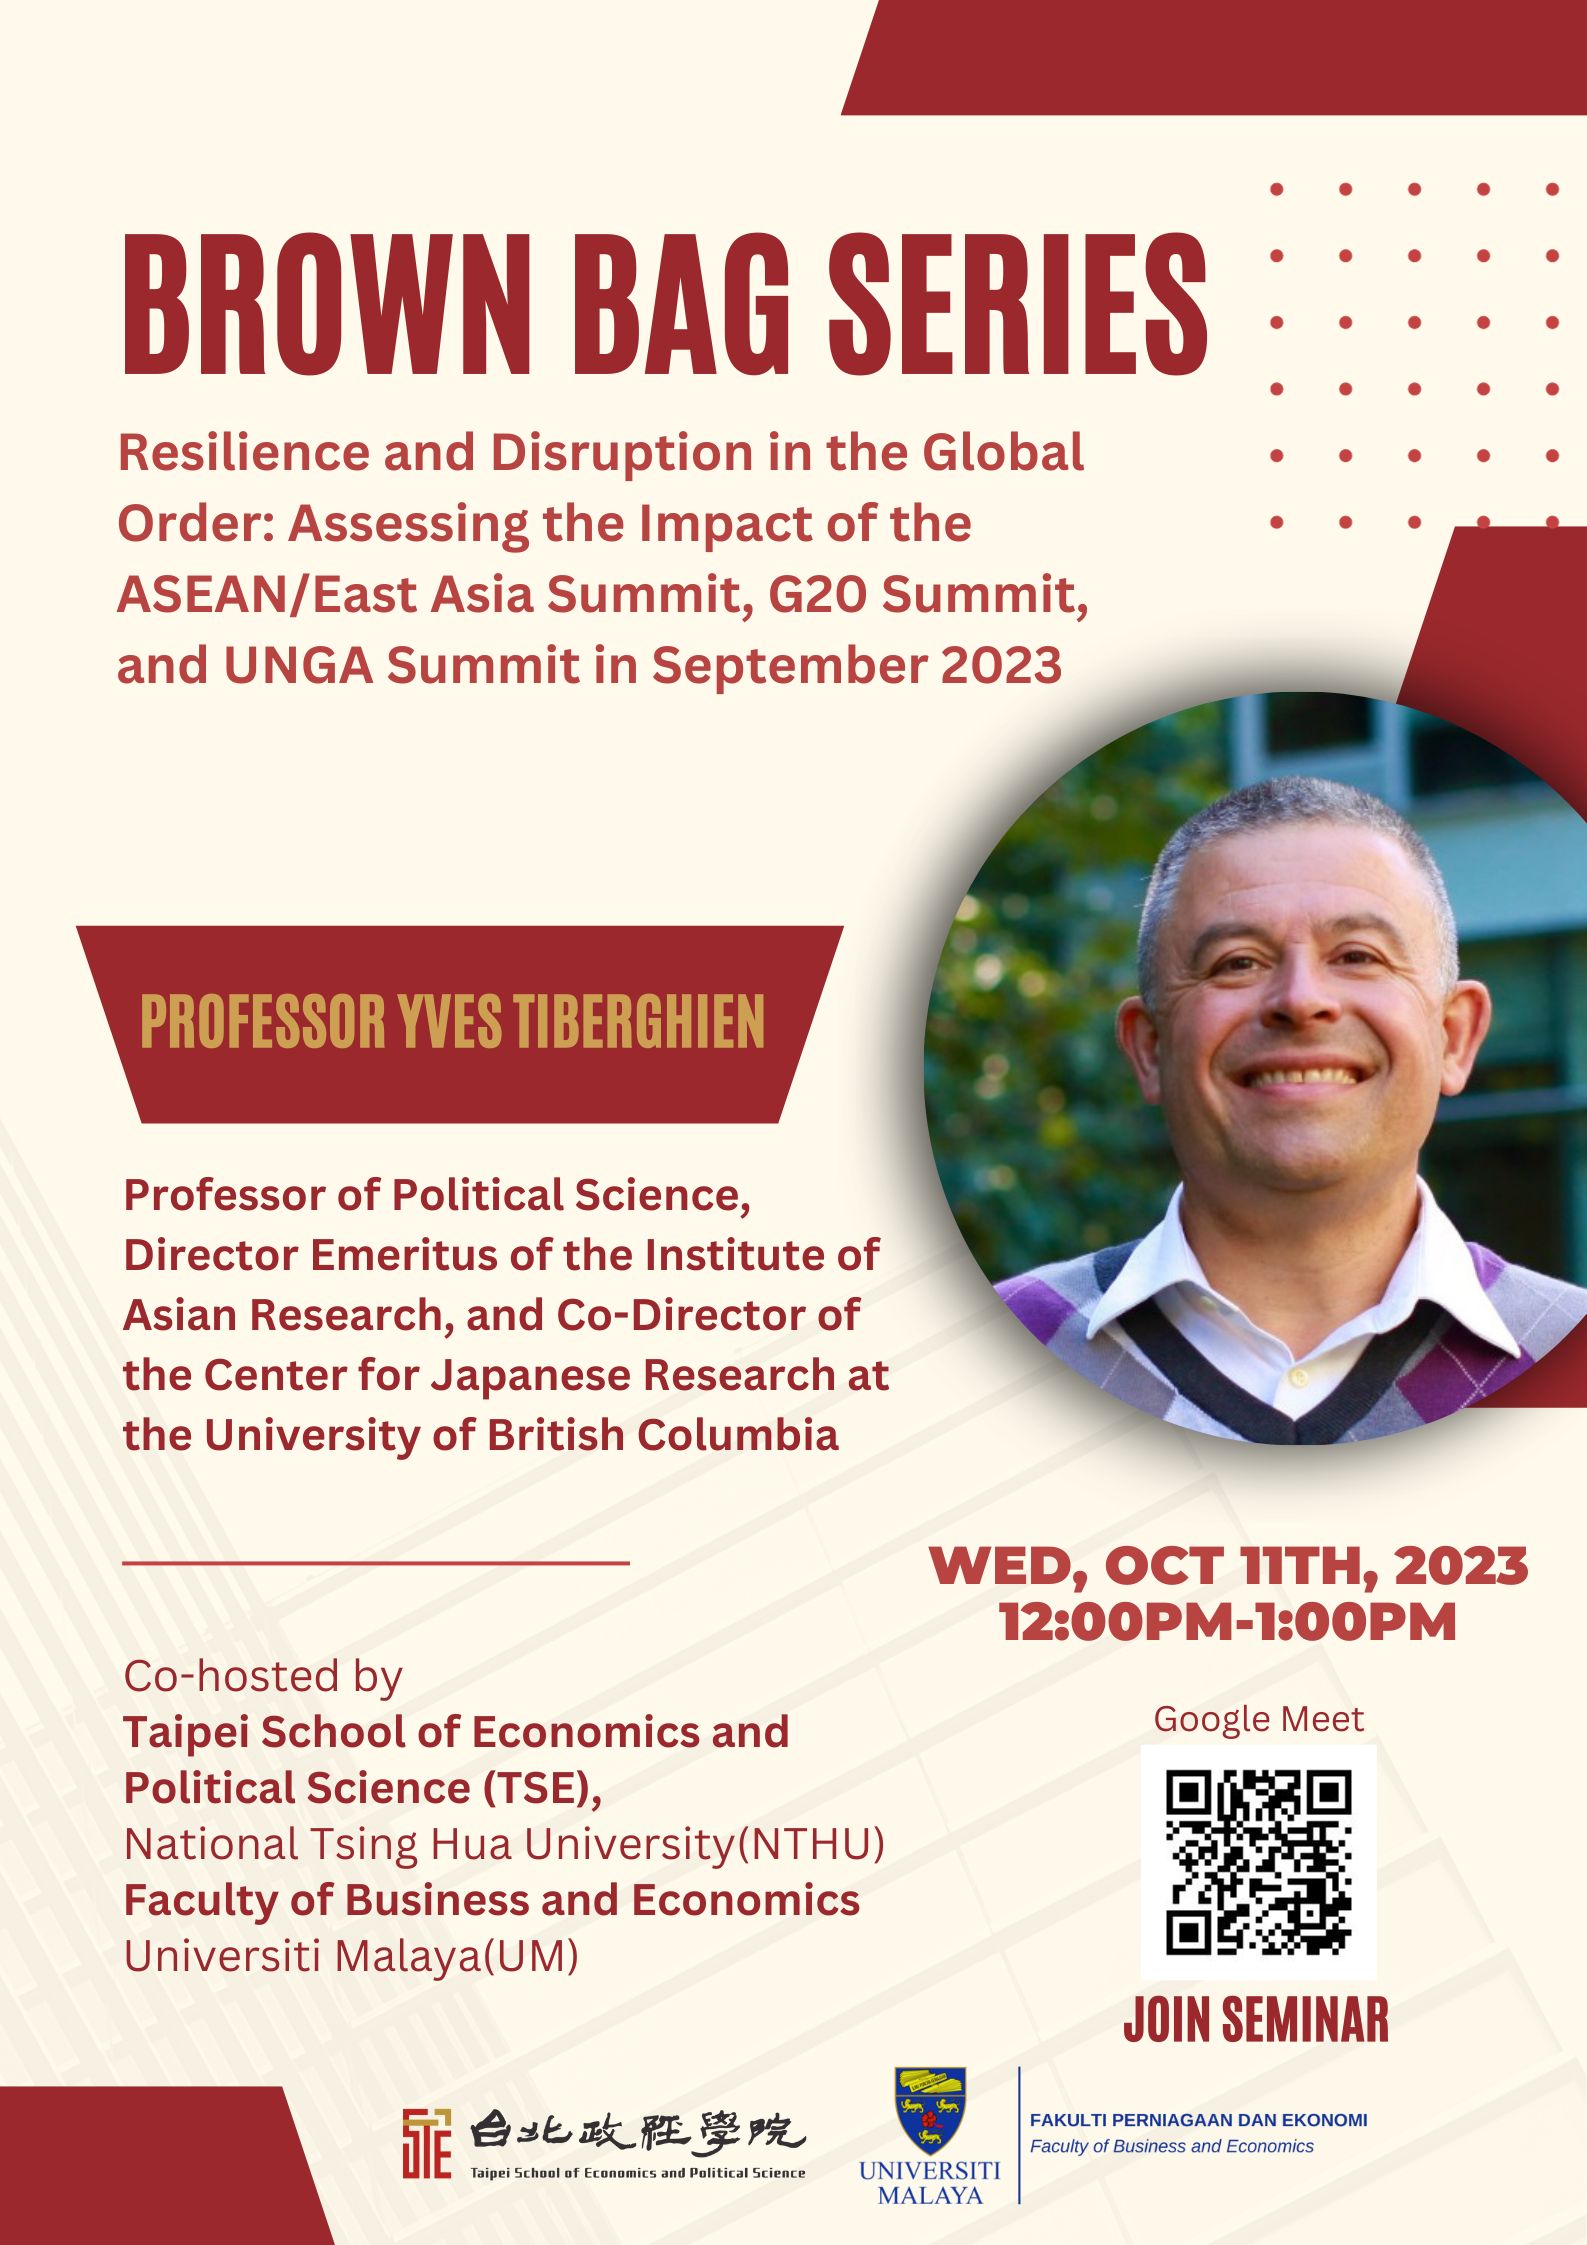 Brown Bag Series: October 11th "Resilience and Disruption in the Global Order: Assessing the Impact of the ASEAN/East Asia Summit, G20 Summit, and UNGA summit in September 2023"